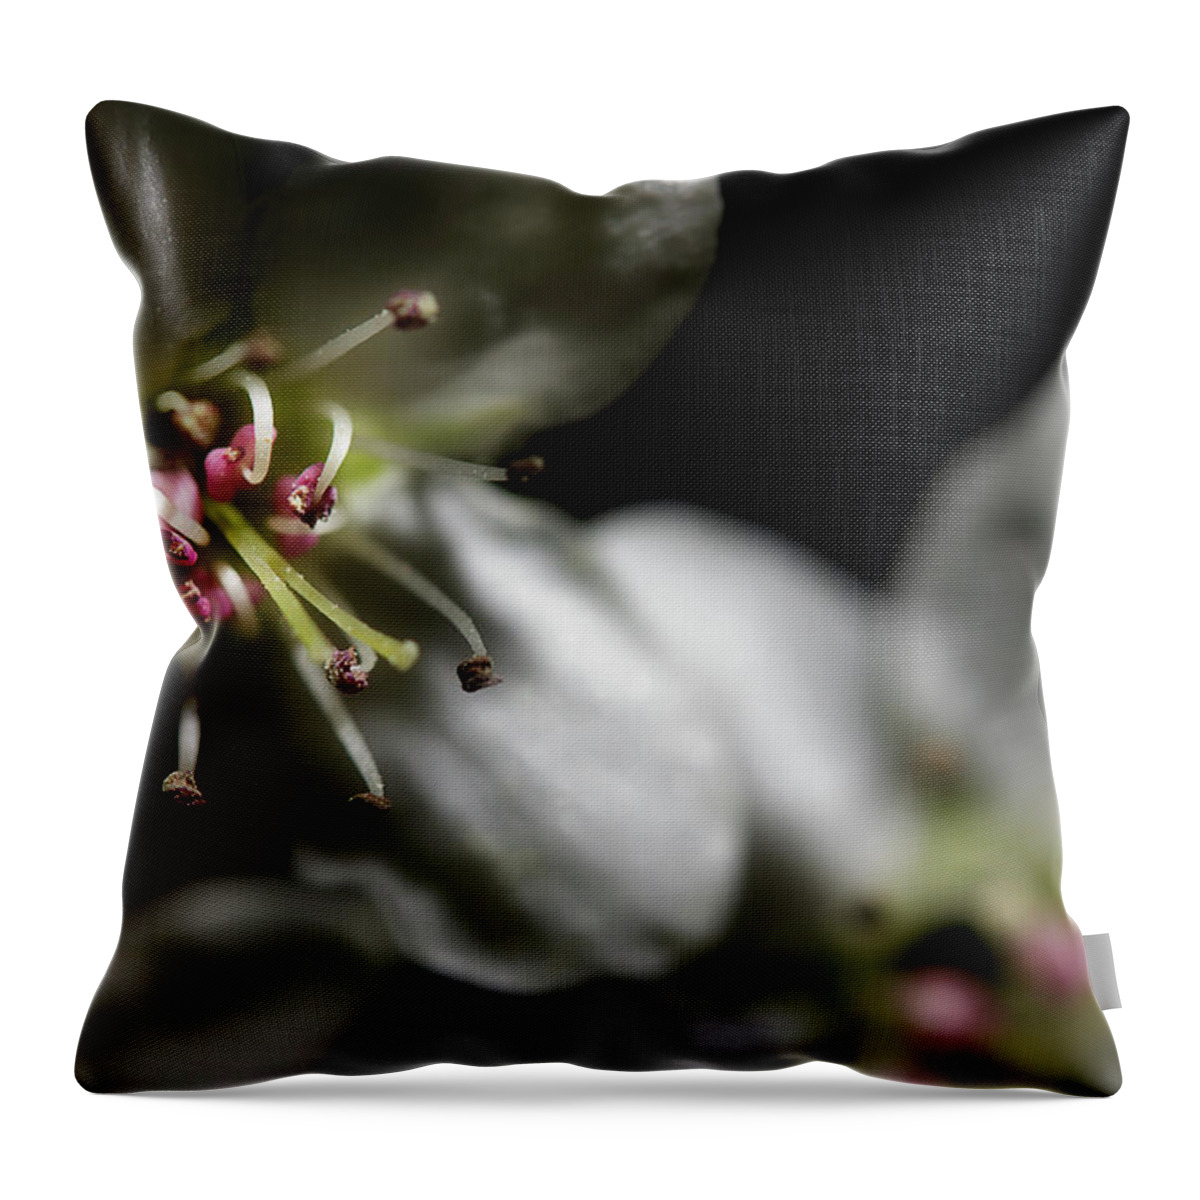 Blossoms Throw Pillow featuring the photograph Pear Blossoms by Mike Eingle